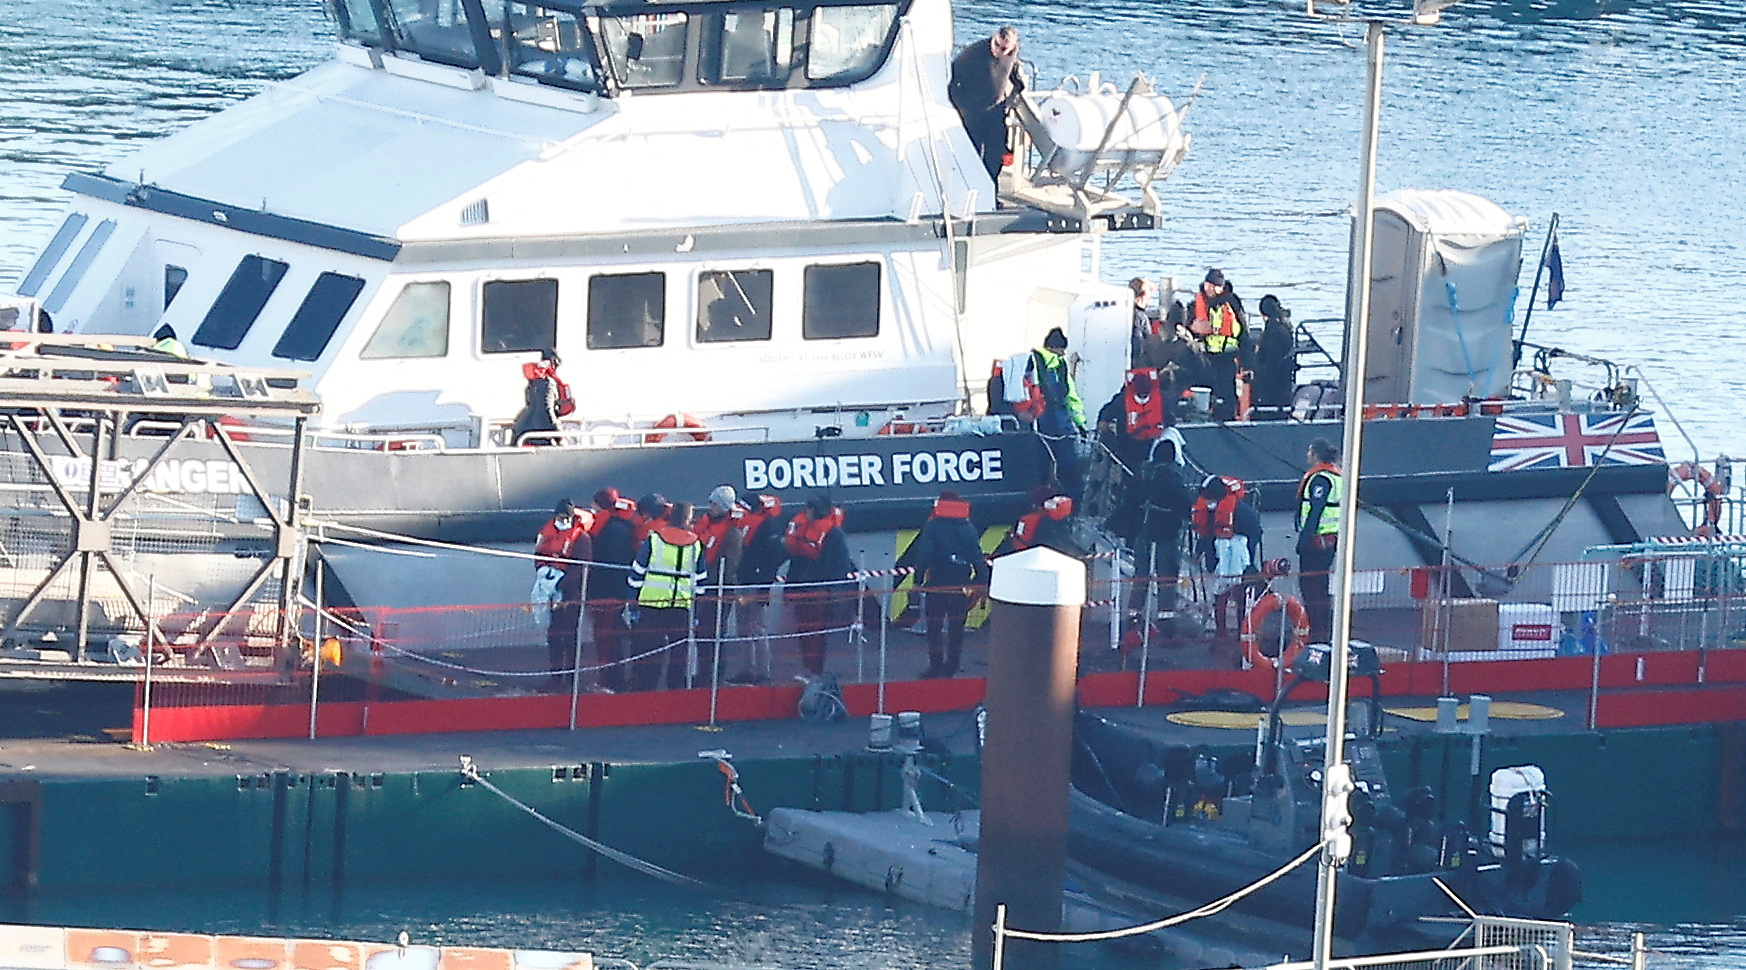 People, believed to be migrants, disembark a Border Force boat at the Border Force processing centre, in Dover